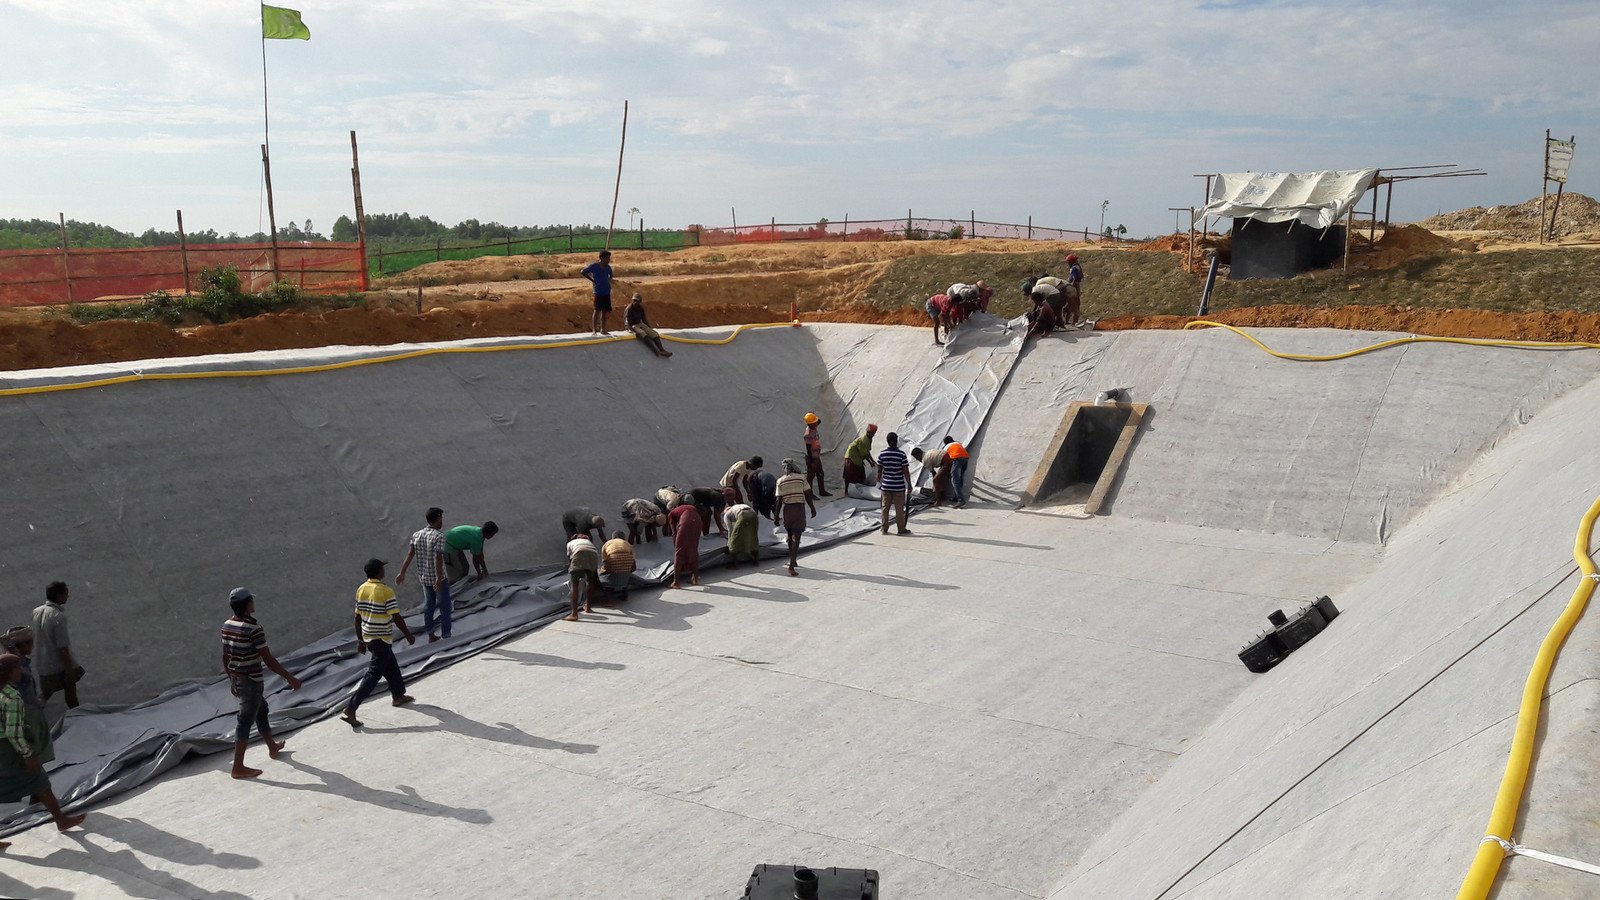 This waste treatment plant was built by Rohingya refugees and Oxfam’s engineers.